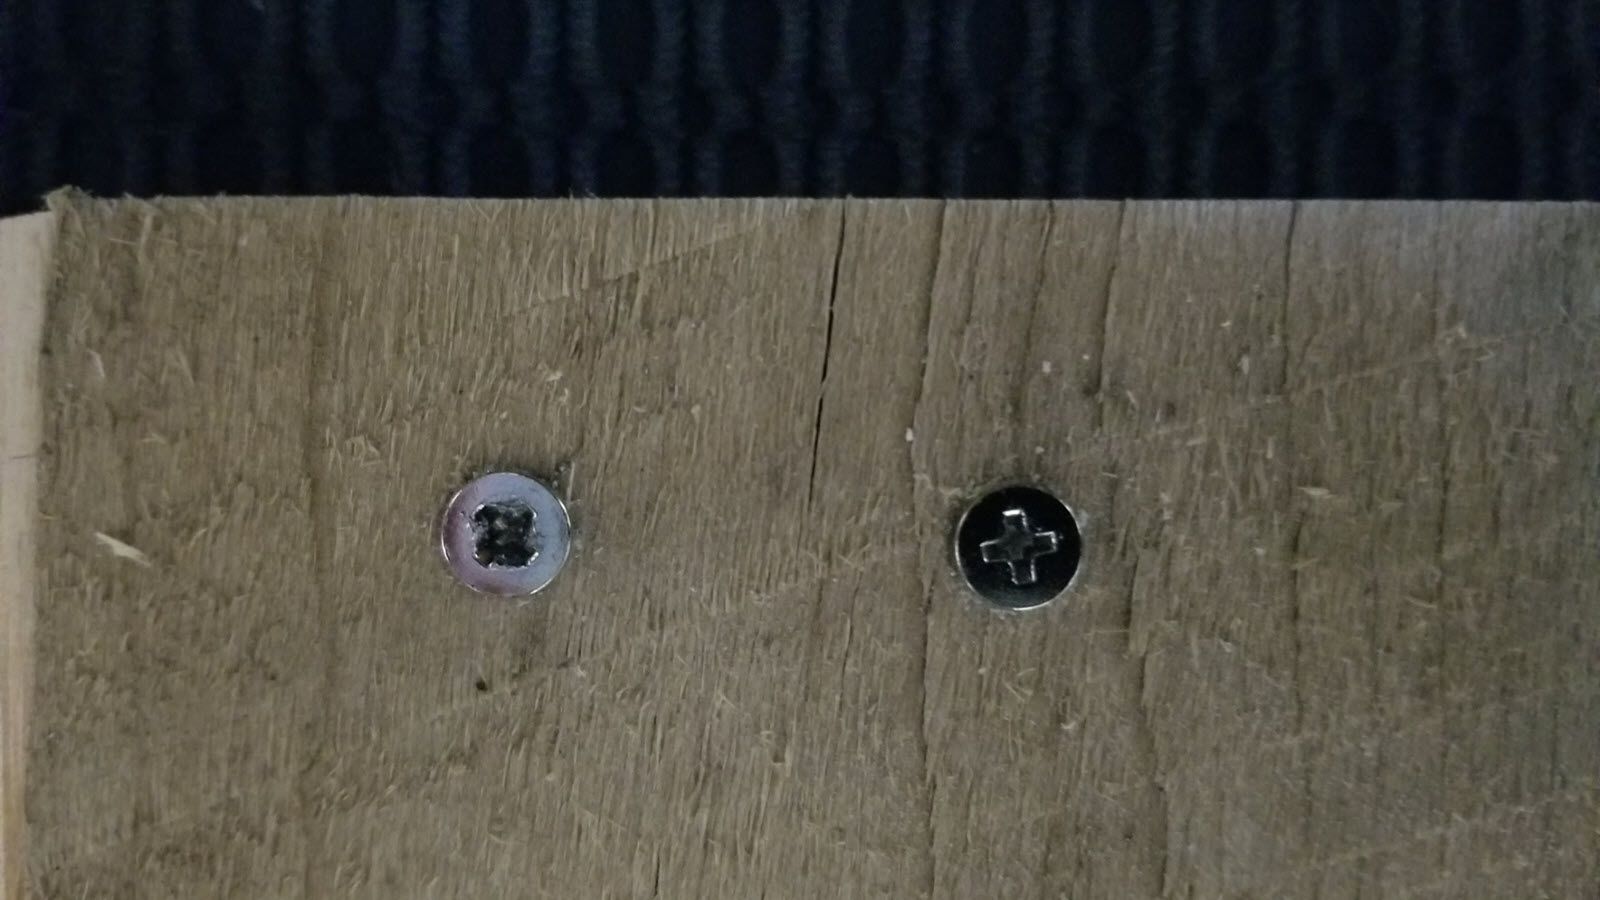 A wood board with two screws in it, the left screw is stripped and the right screw is intact.